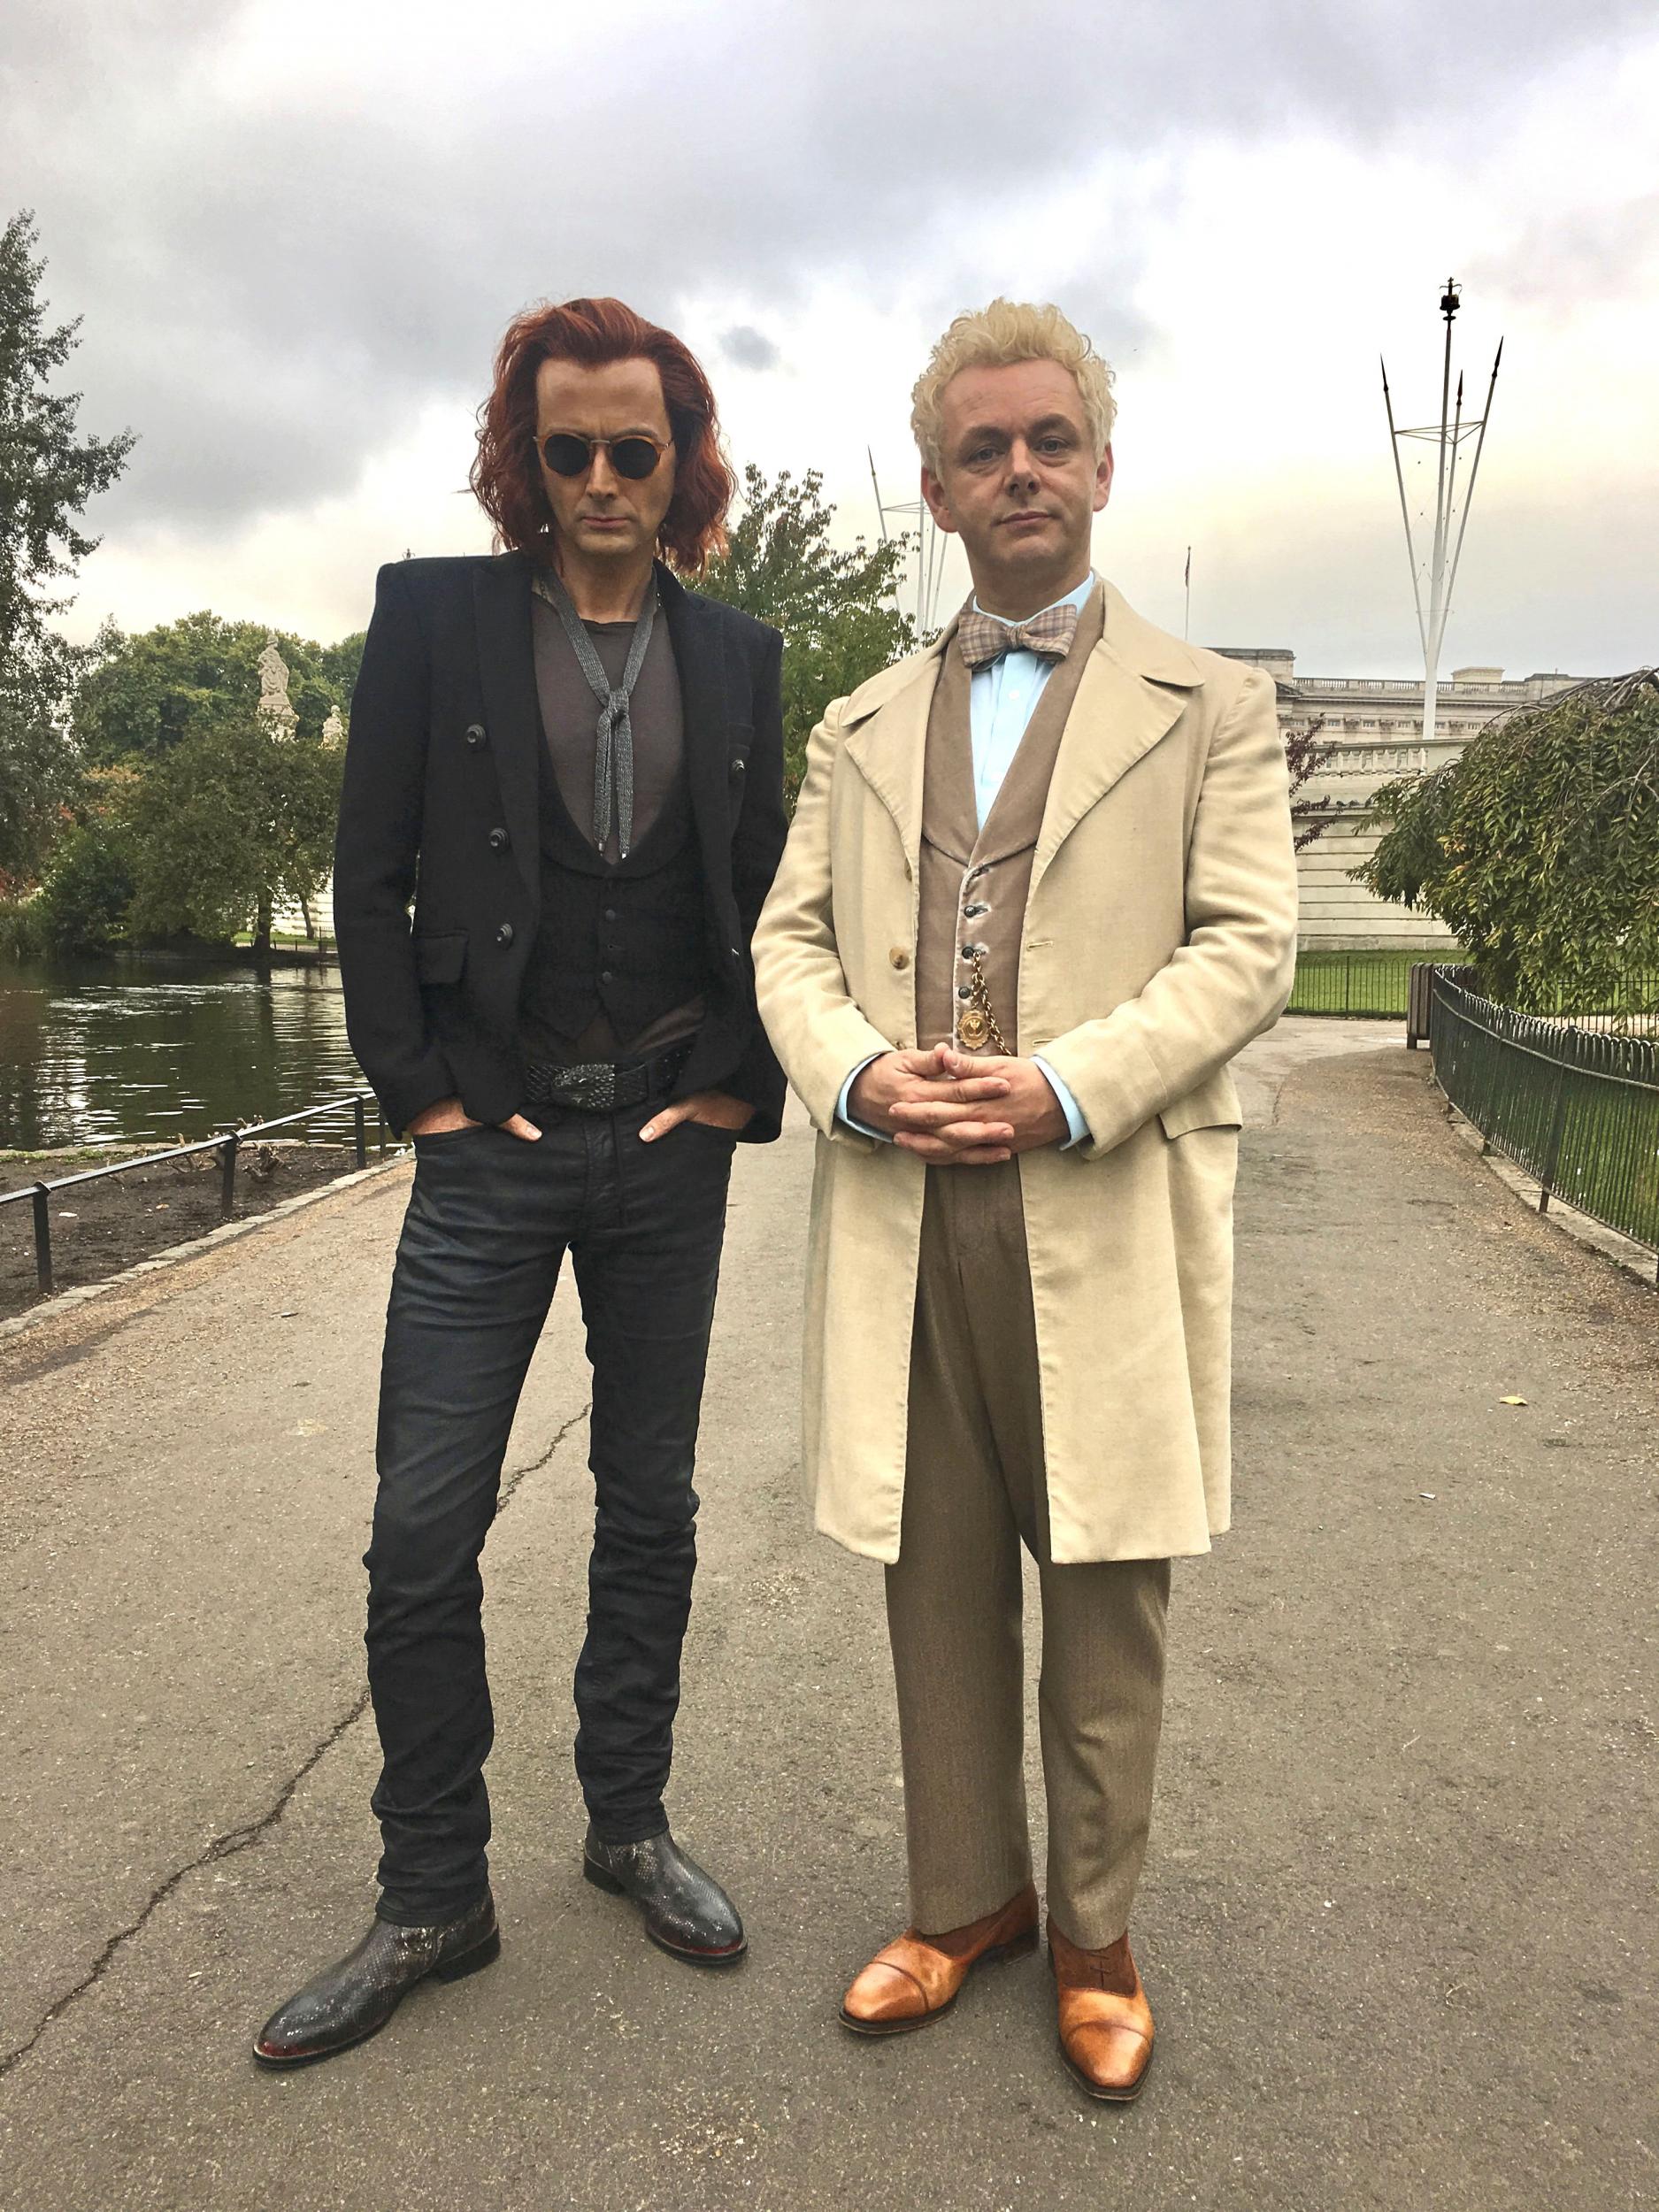 David Tennant and Michael Sheen in ‘Good Omens’, which Gaiman co-wrote with Terry Pratchett